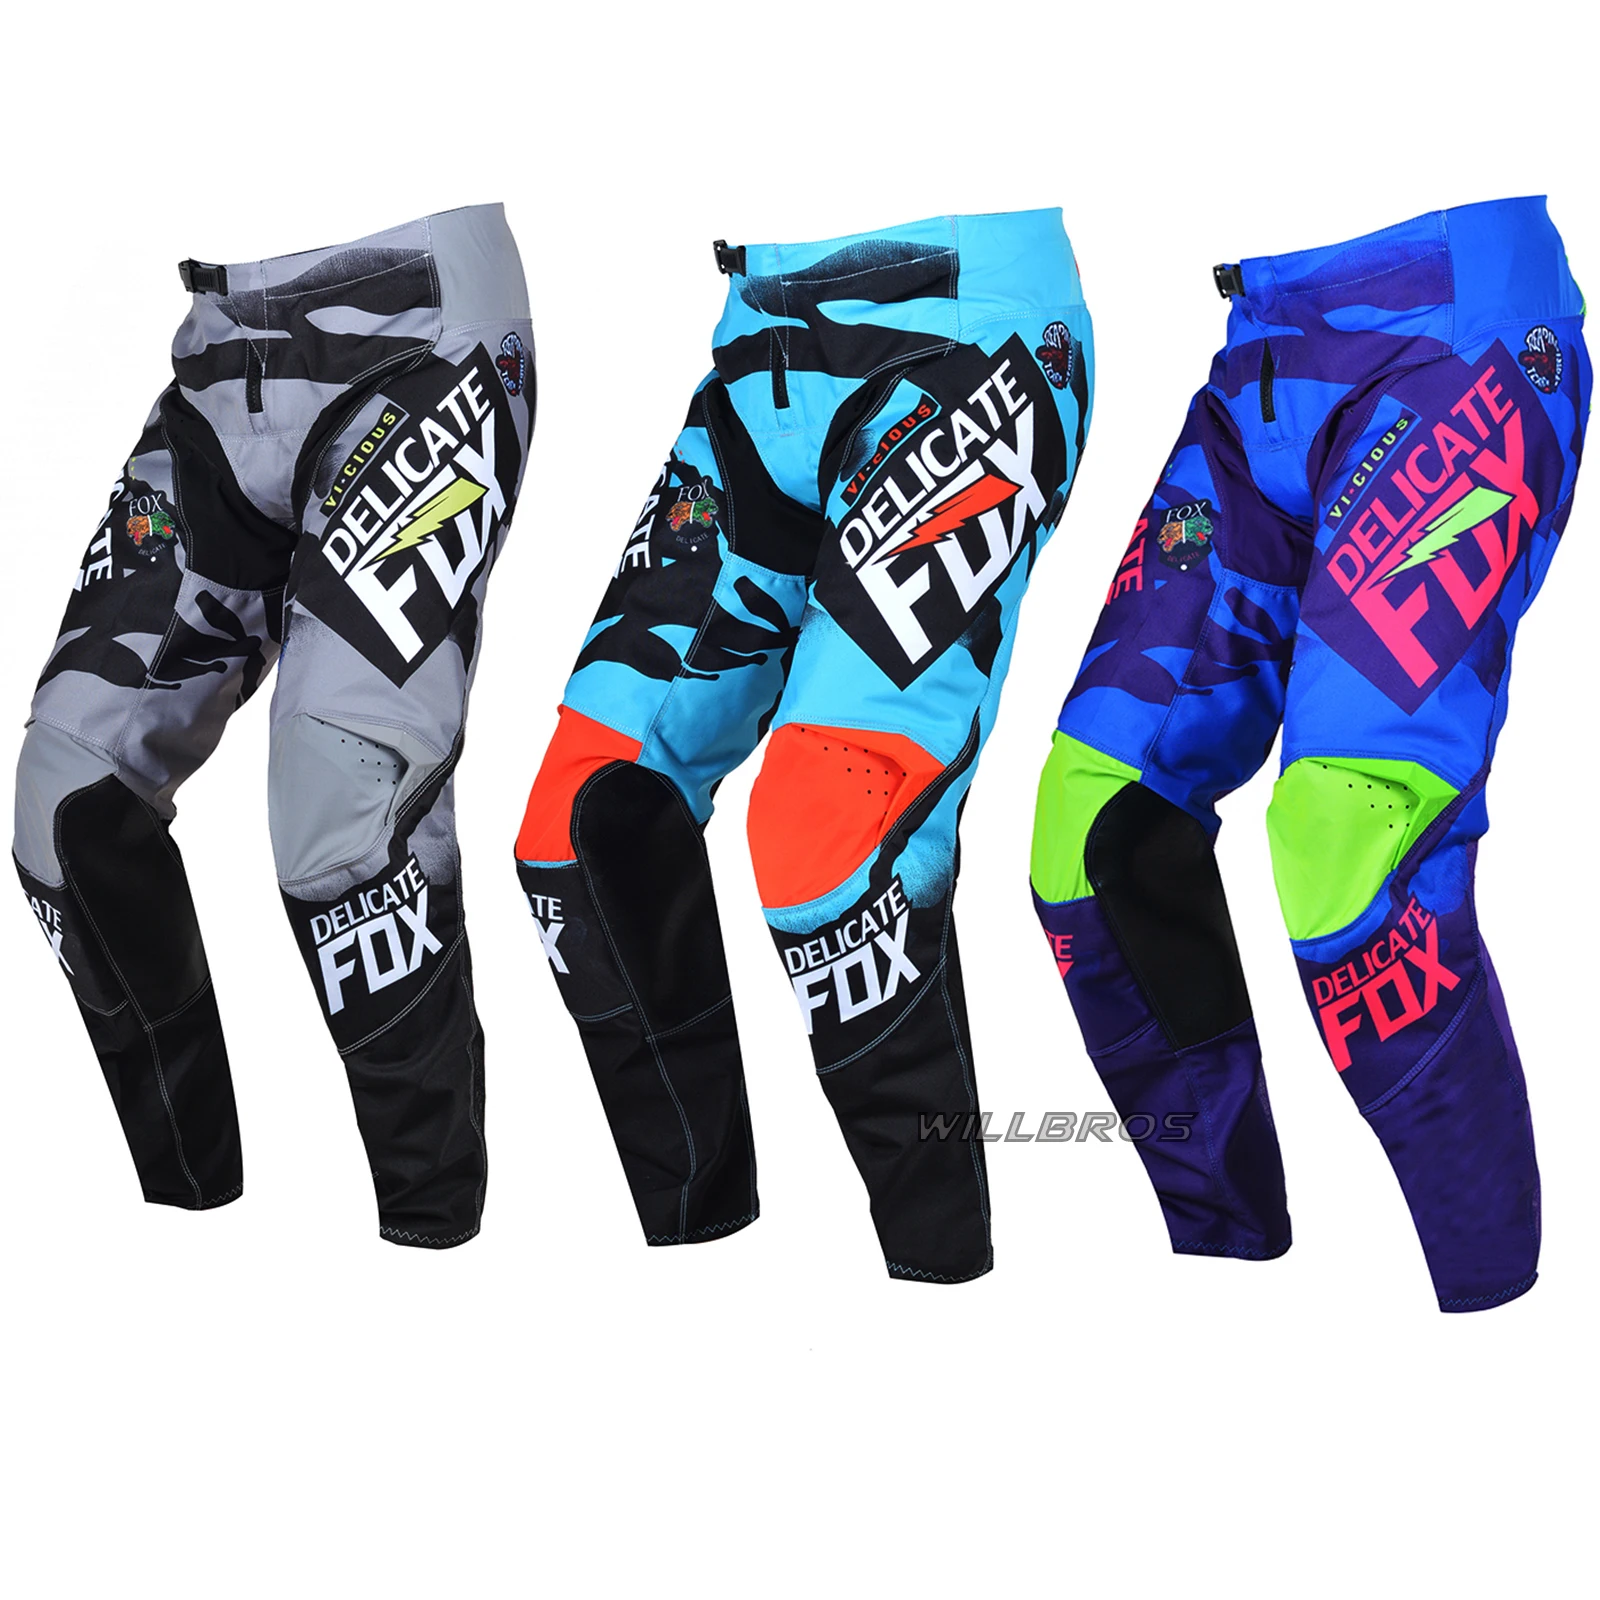 Ross enduro trousers dirt bike clothes mx mountain bicycle adult moto equipment for men thumb200